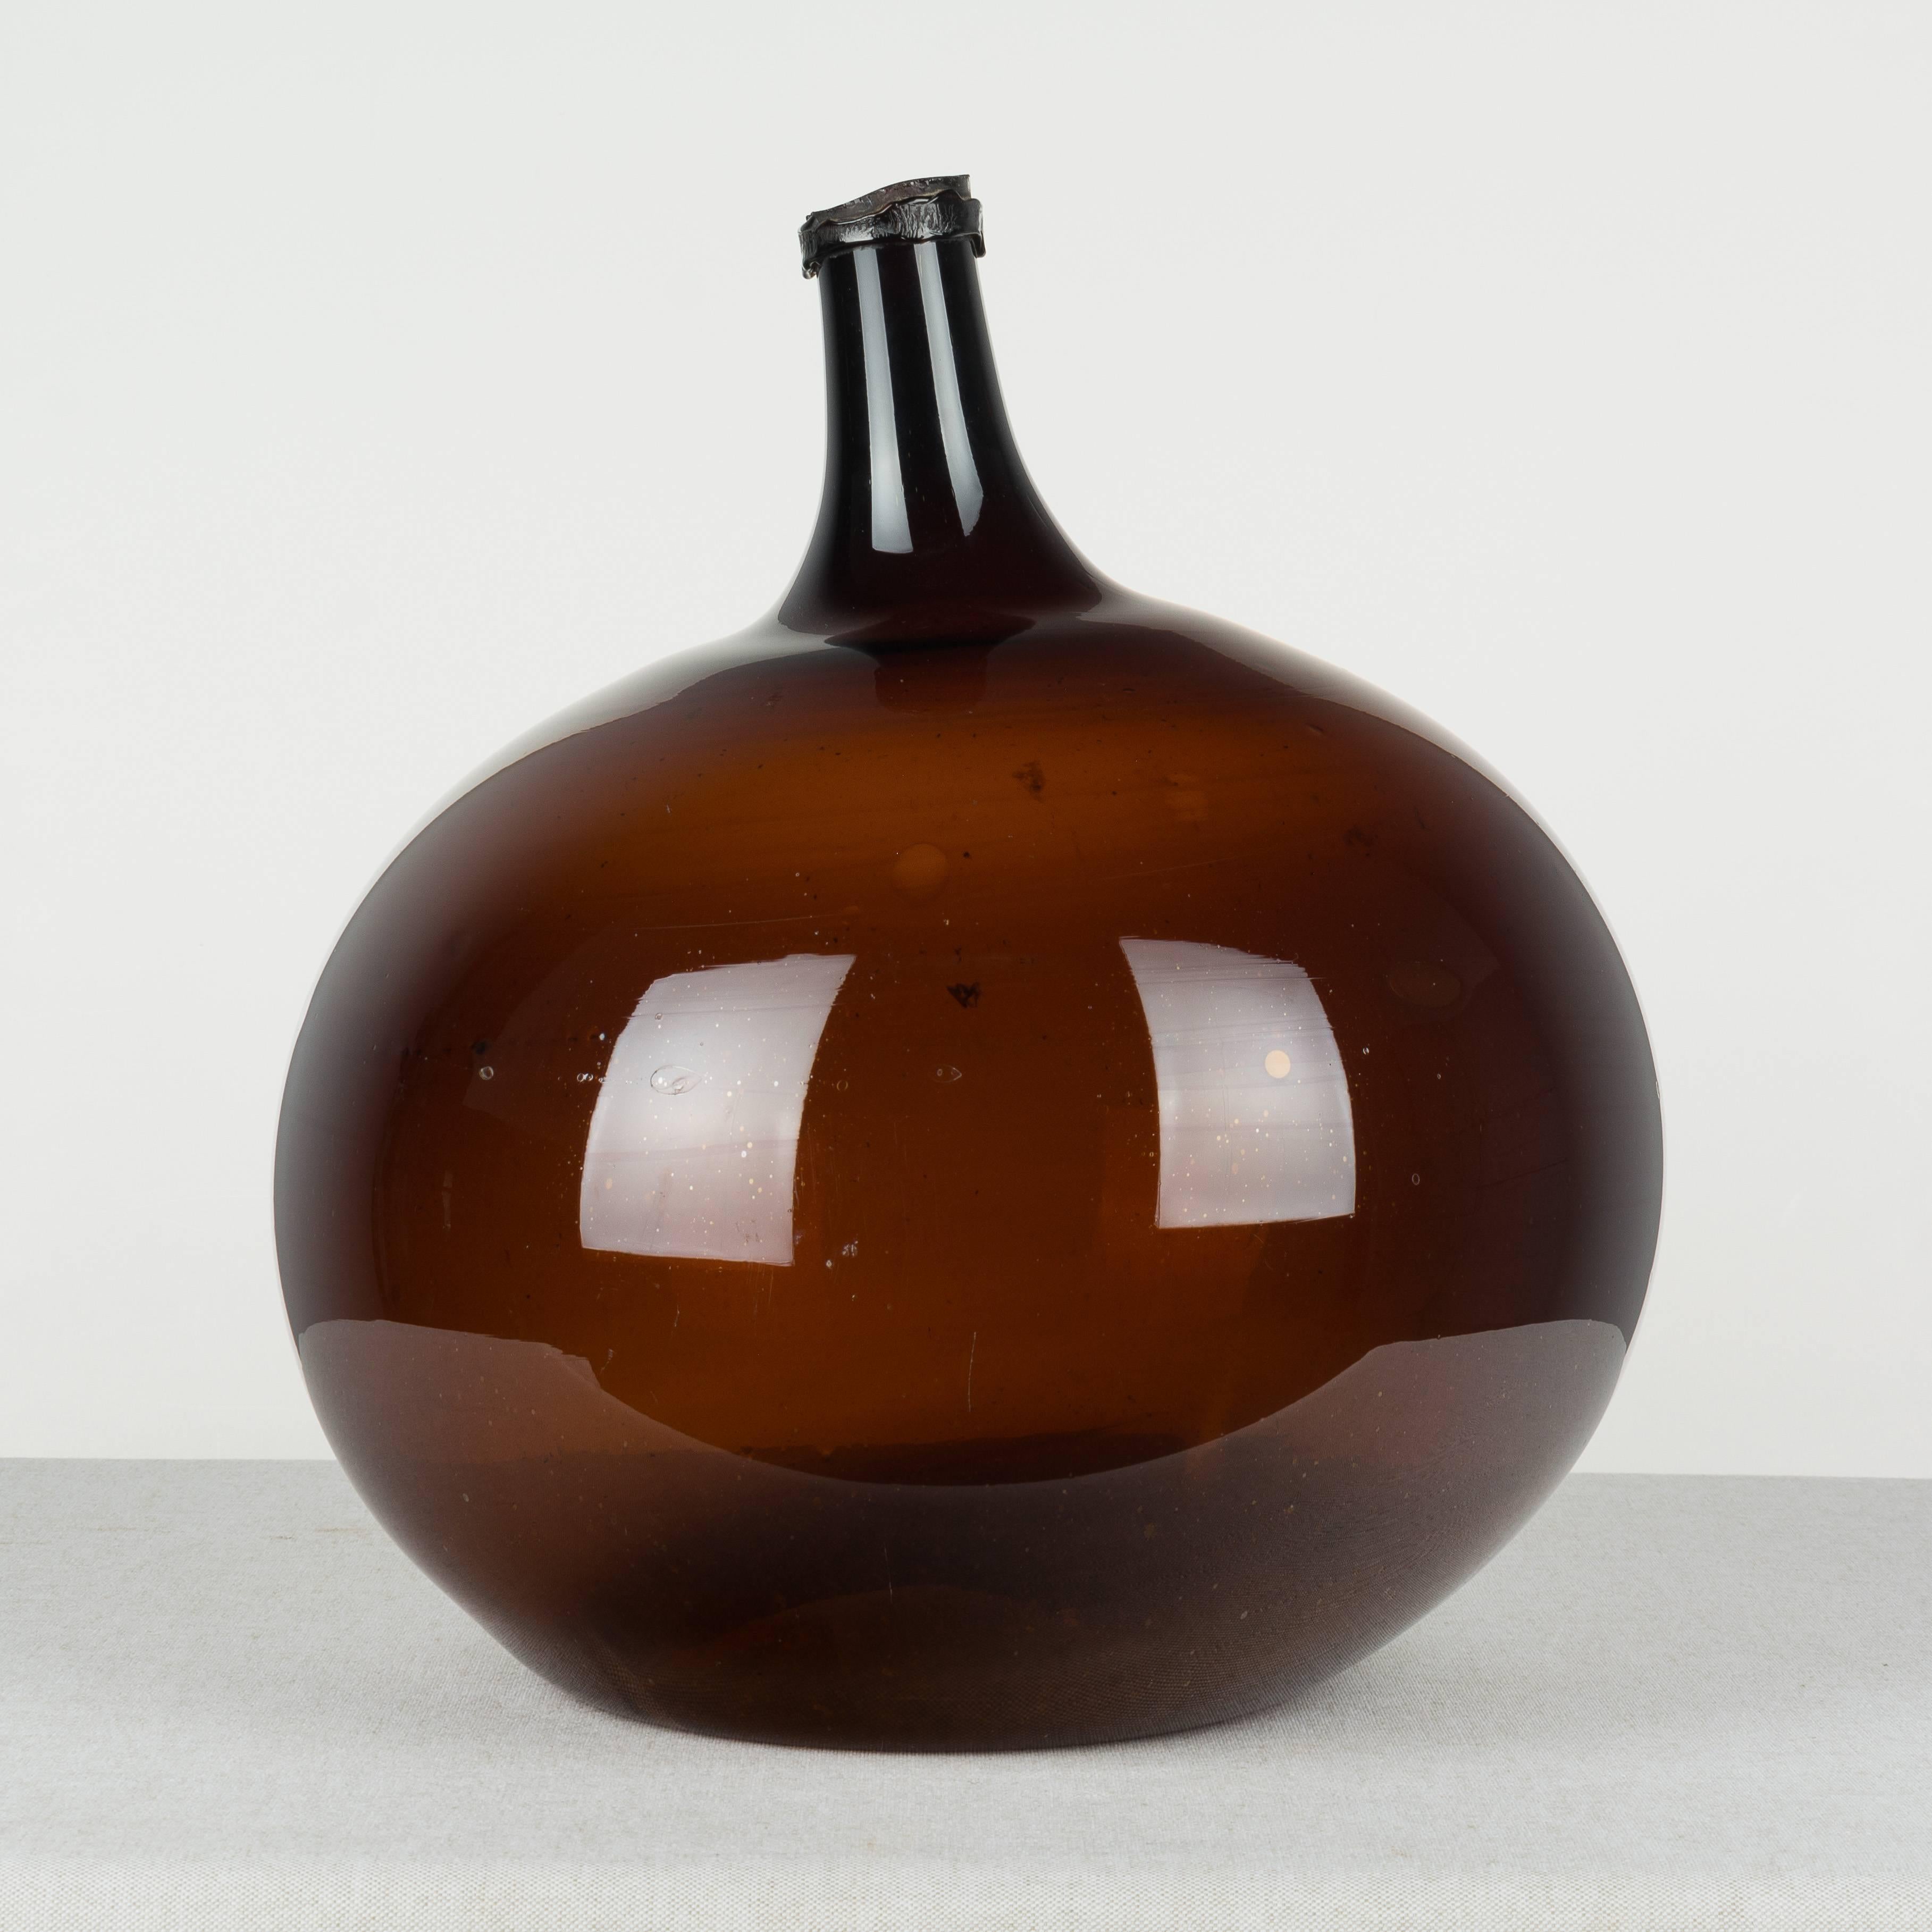 French Provincial 19th Century French Blown Glass Demijohn Bottle